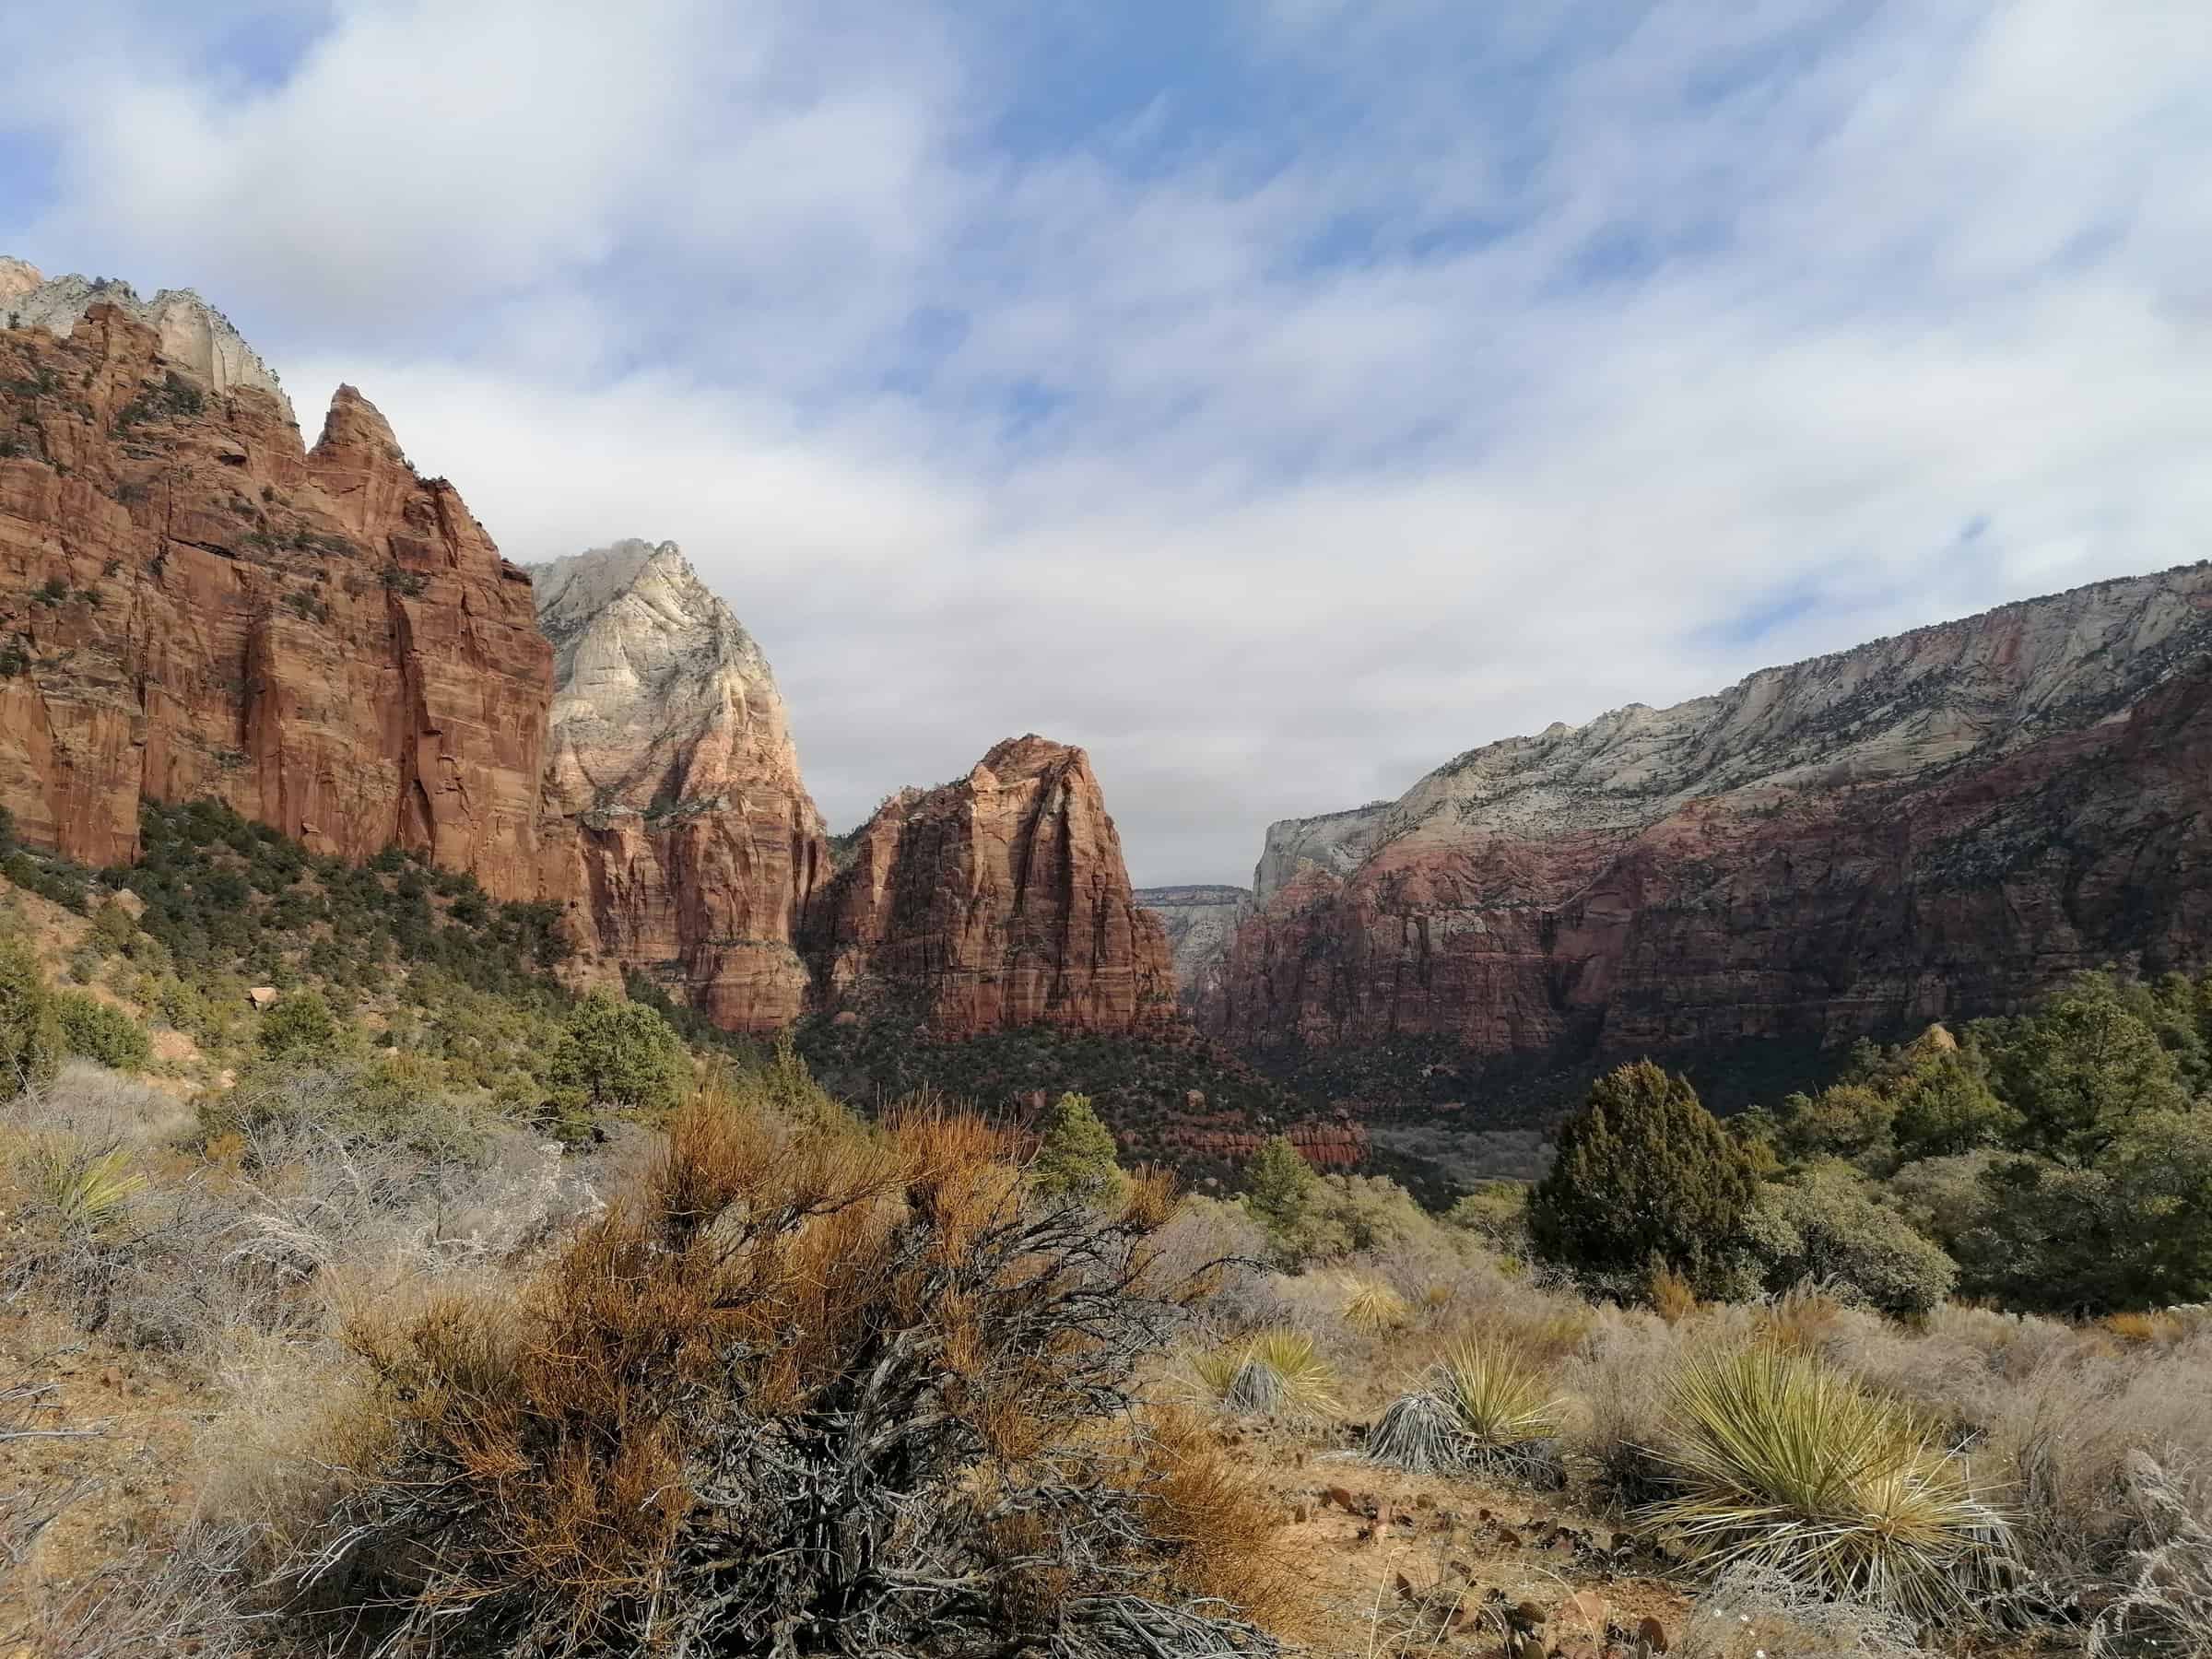 Dramatic landscape of Zion National Park, showcasing towering red rock formations with white and tan striations, contrasted by the varied greenery of shrubs and trees. The partly cloudy sky casts dynamic shadows over the scene, enhancing the natural splendor of the park